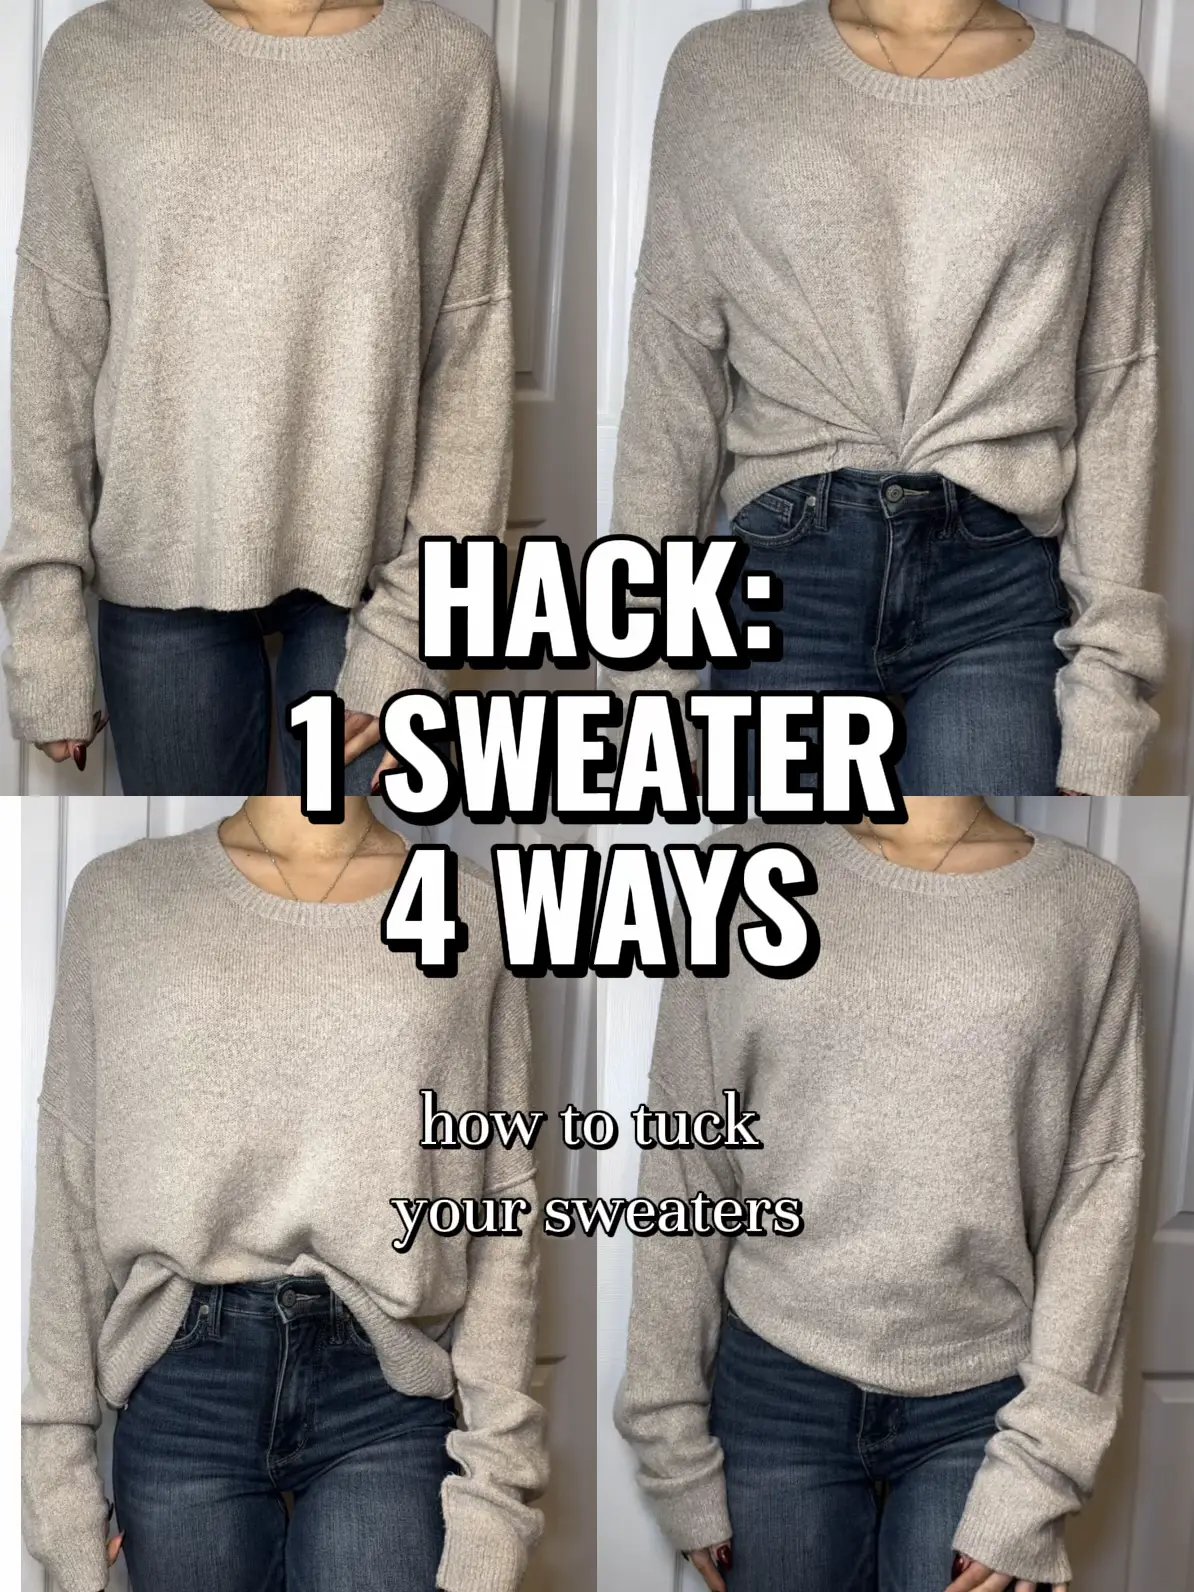 HOW TO TUCK IN A SWEATER - A REAL LIFE HACK! (works for all tops